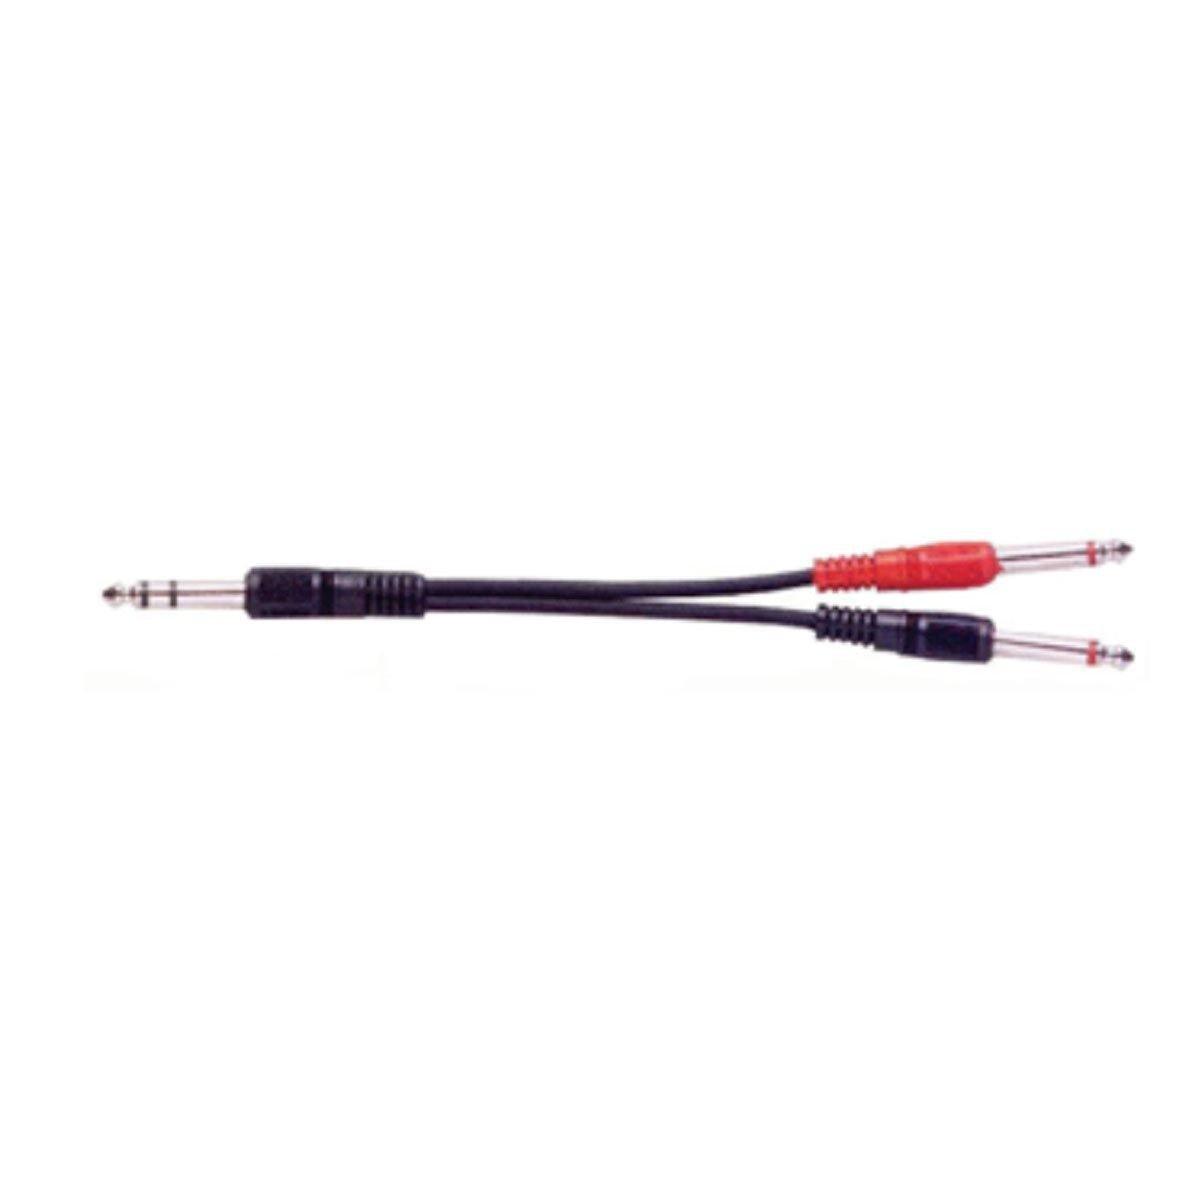 3 Ft 6.3 Stereo To 2 X 6.3 Mono Jack Cable - Accessories - Cables & Adaptors by AMS at Muso's Stuff